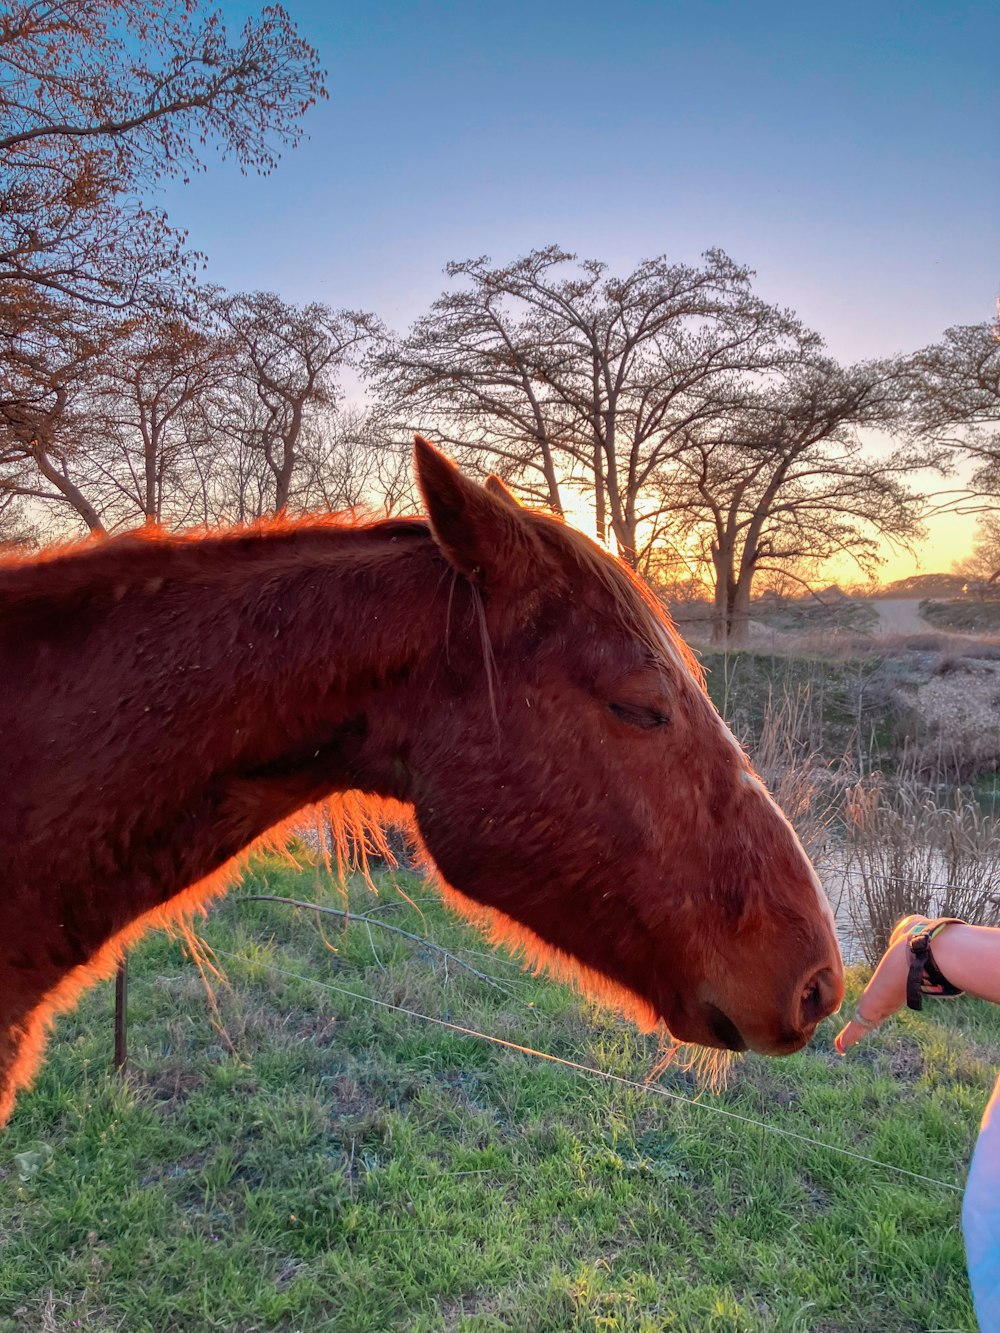 a woman is petting a horse in a field